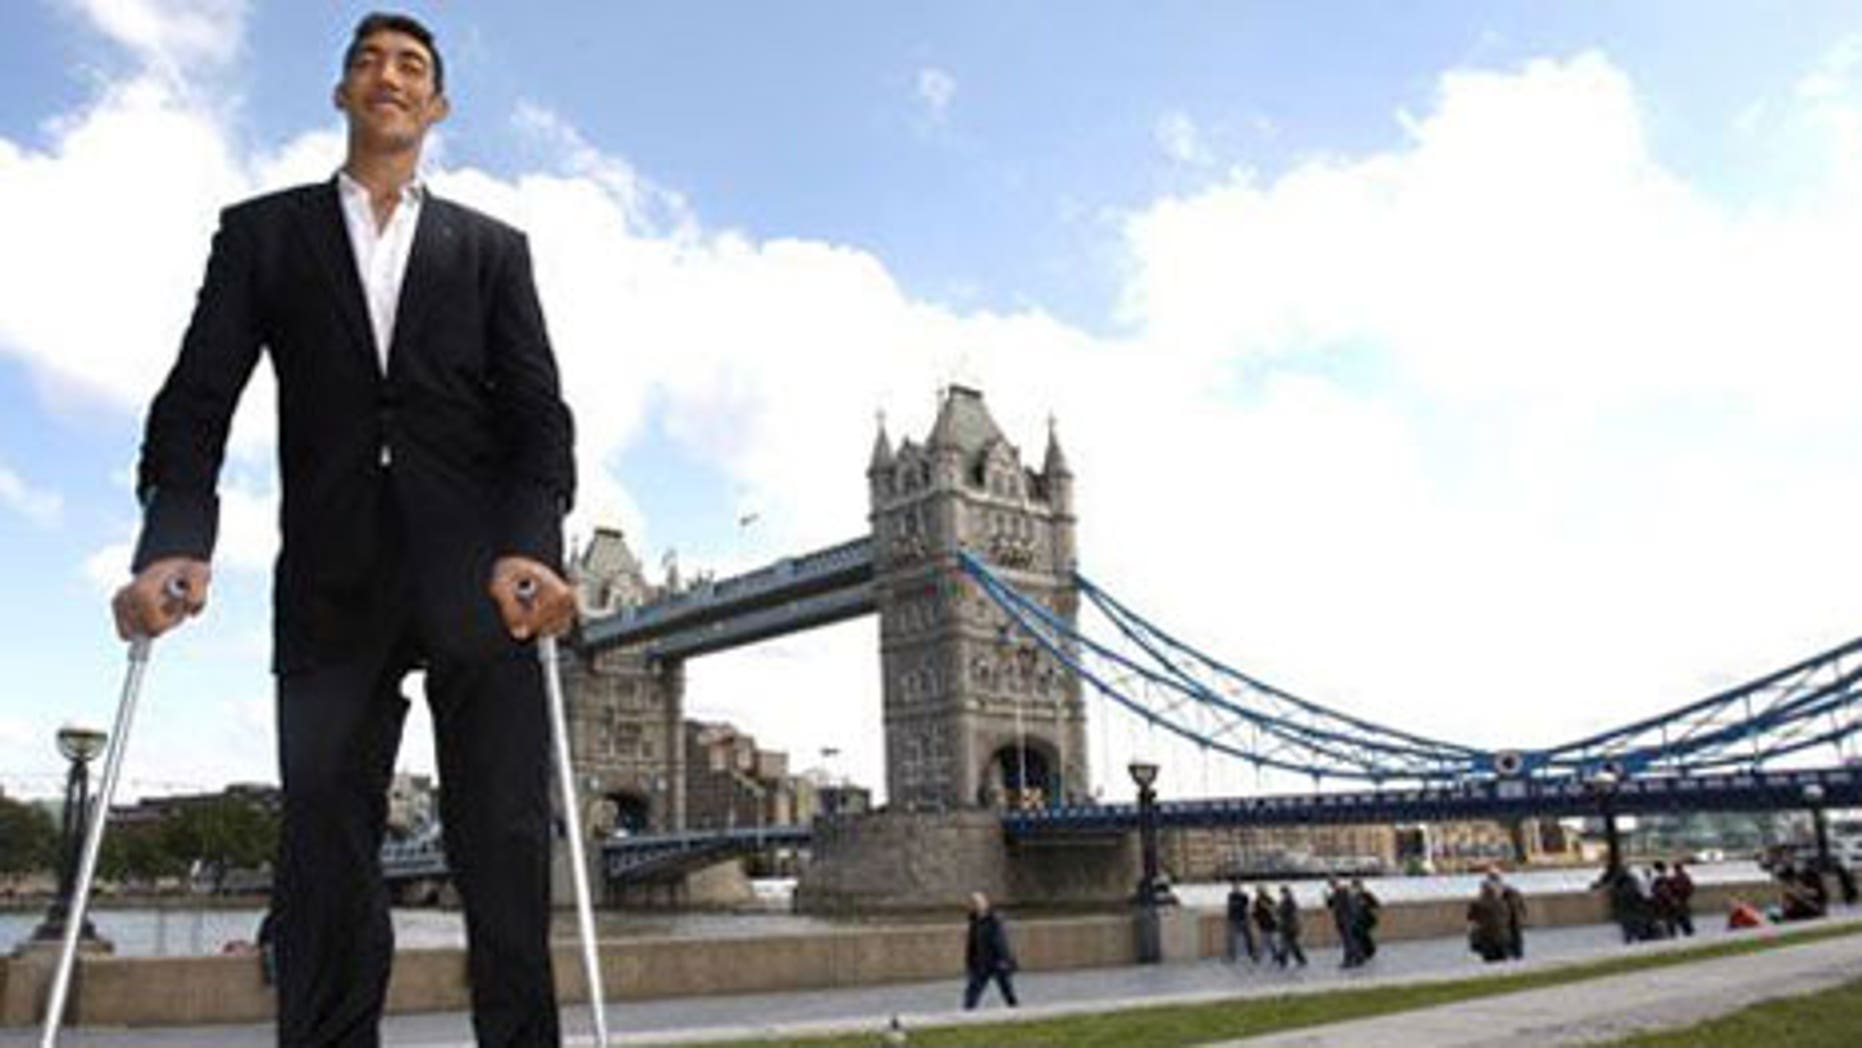 World's tallest man finally stops growing after pioneering treatment at